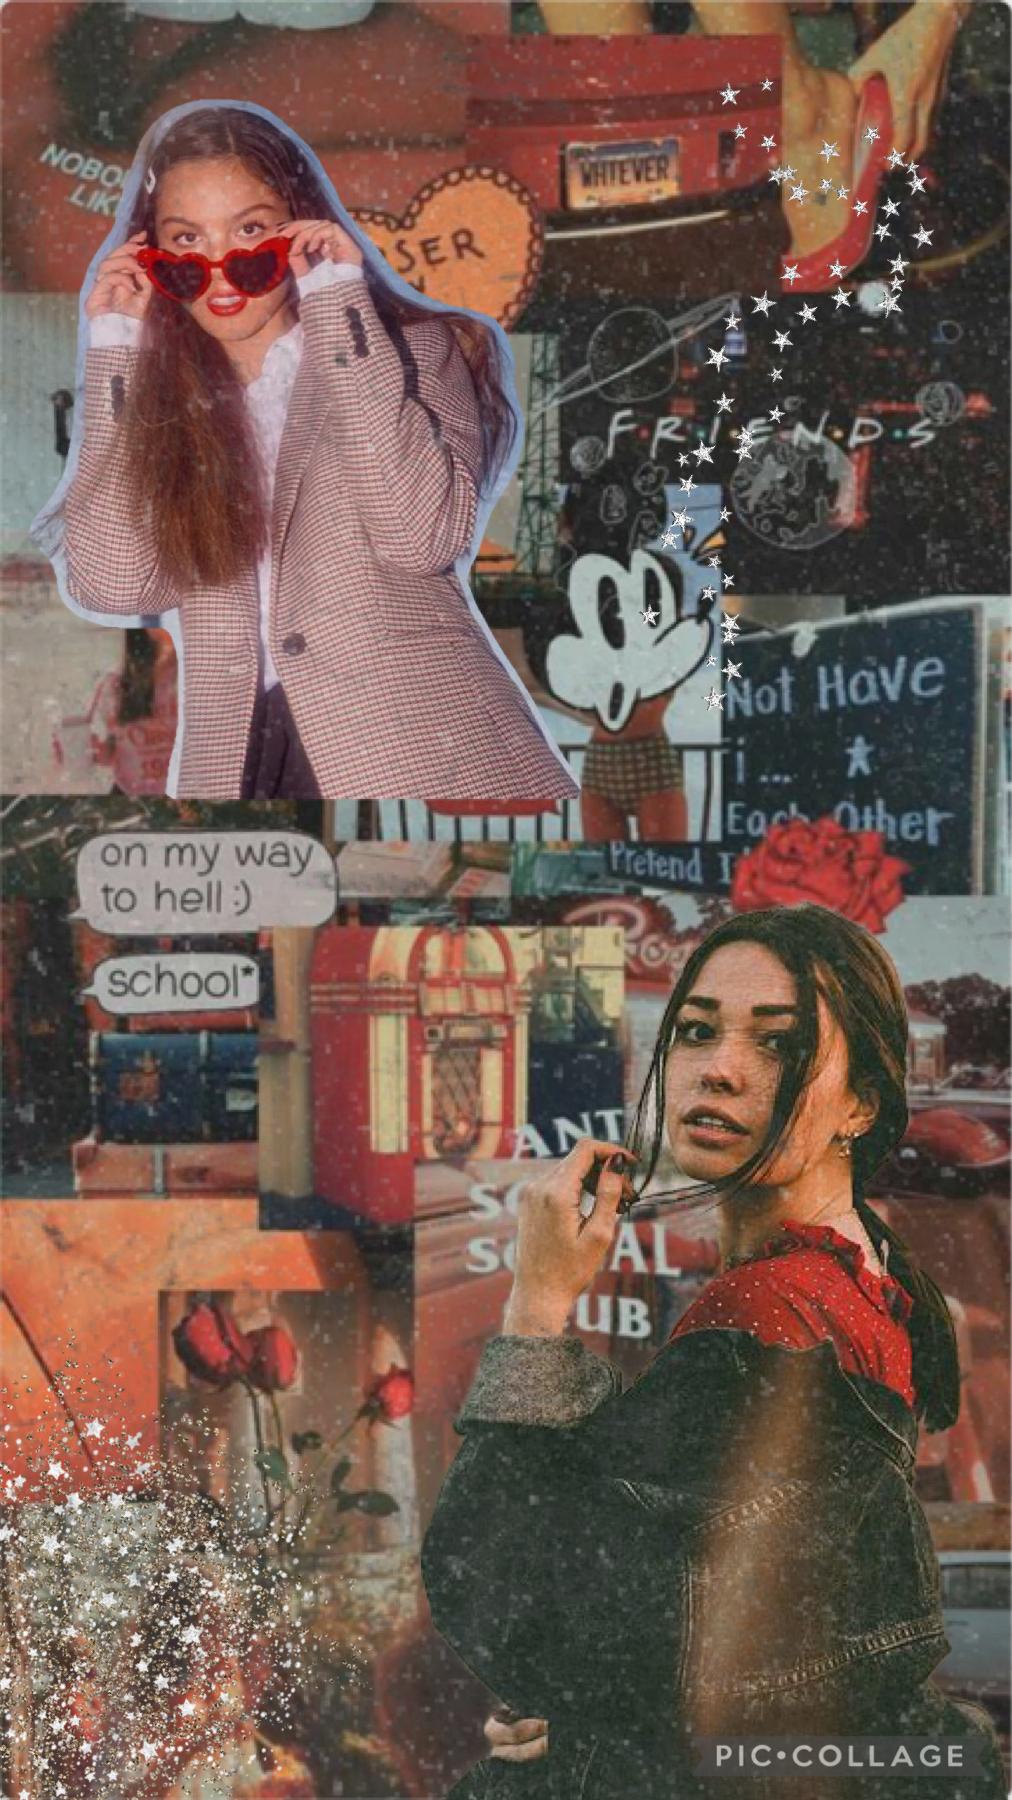 ✨TAP✨
What!? It’s a collage!? It’s been so long since I posted a collage! Can y’all rate this please? Sorry it doesn’t have a quote it would look cluttered! ✨5/20/21✨